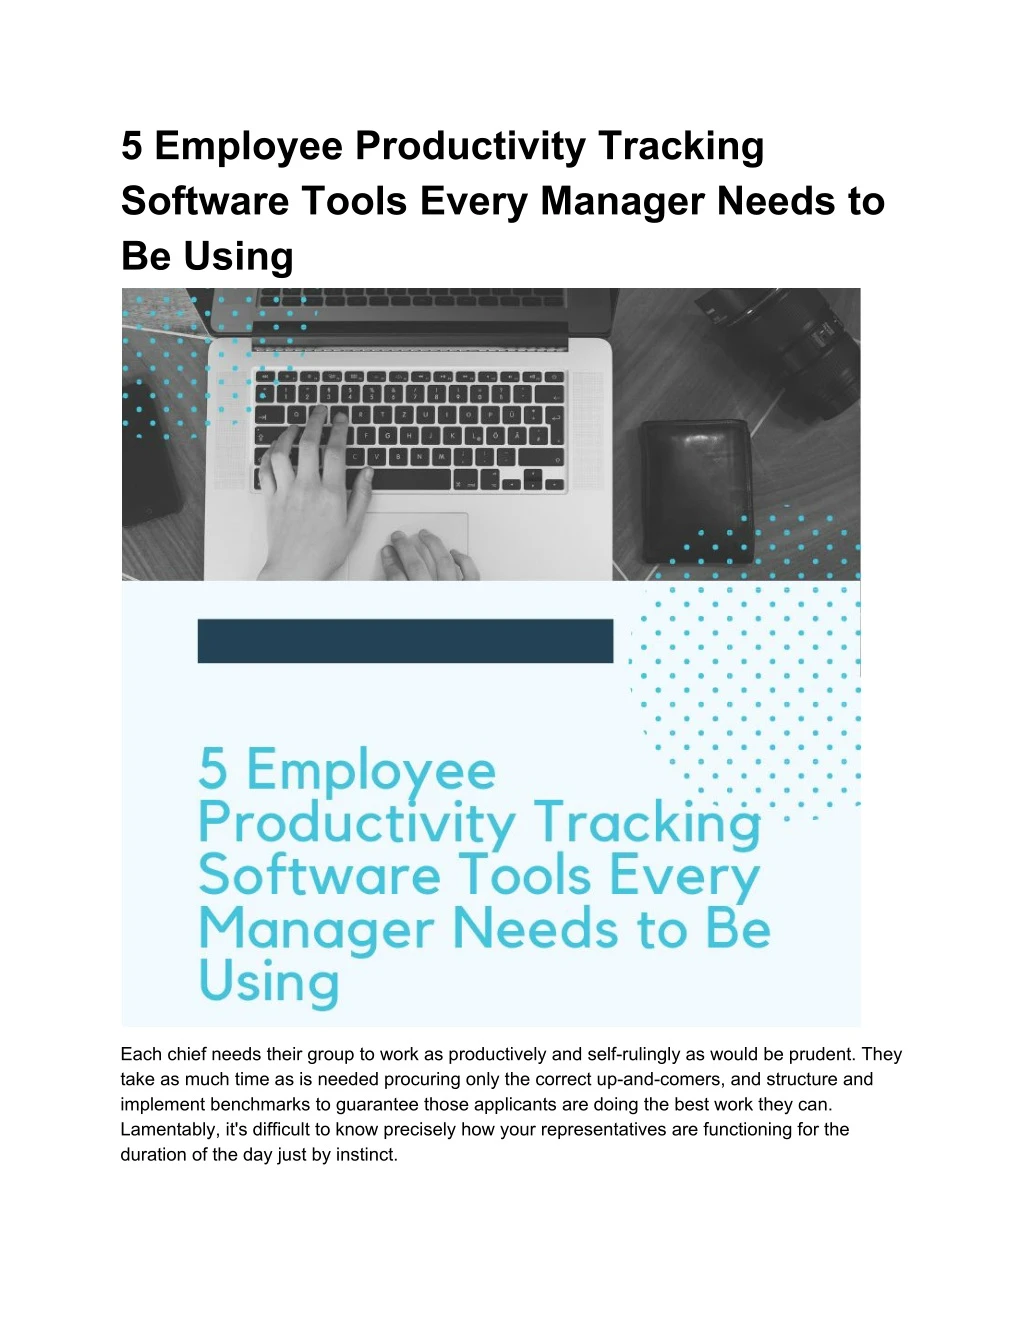 5 employee productivity tracking software tools